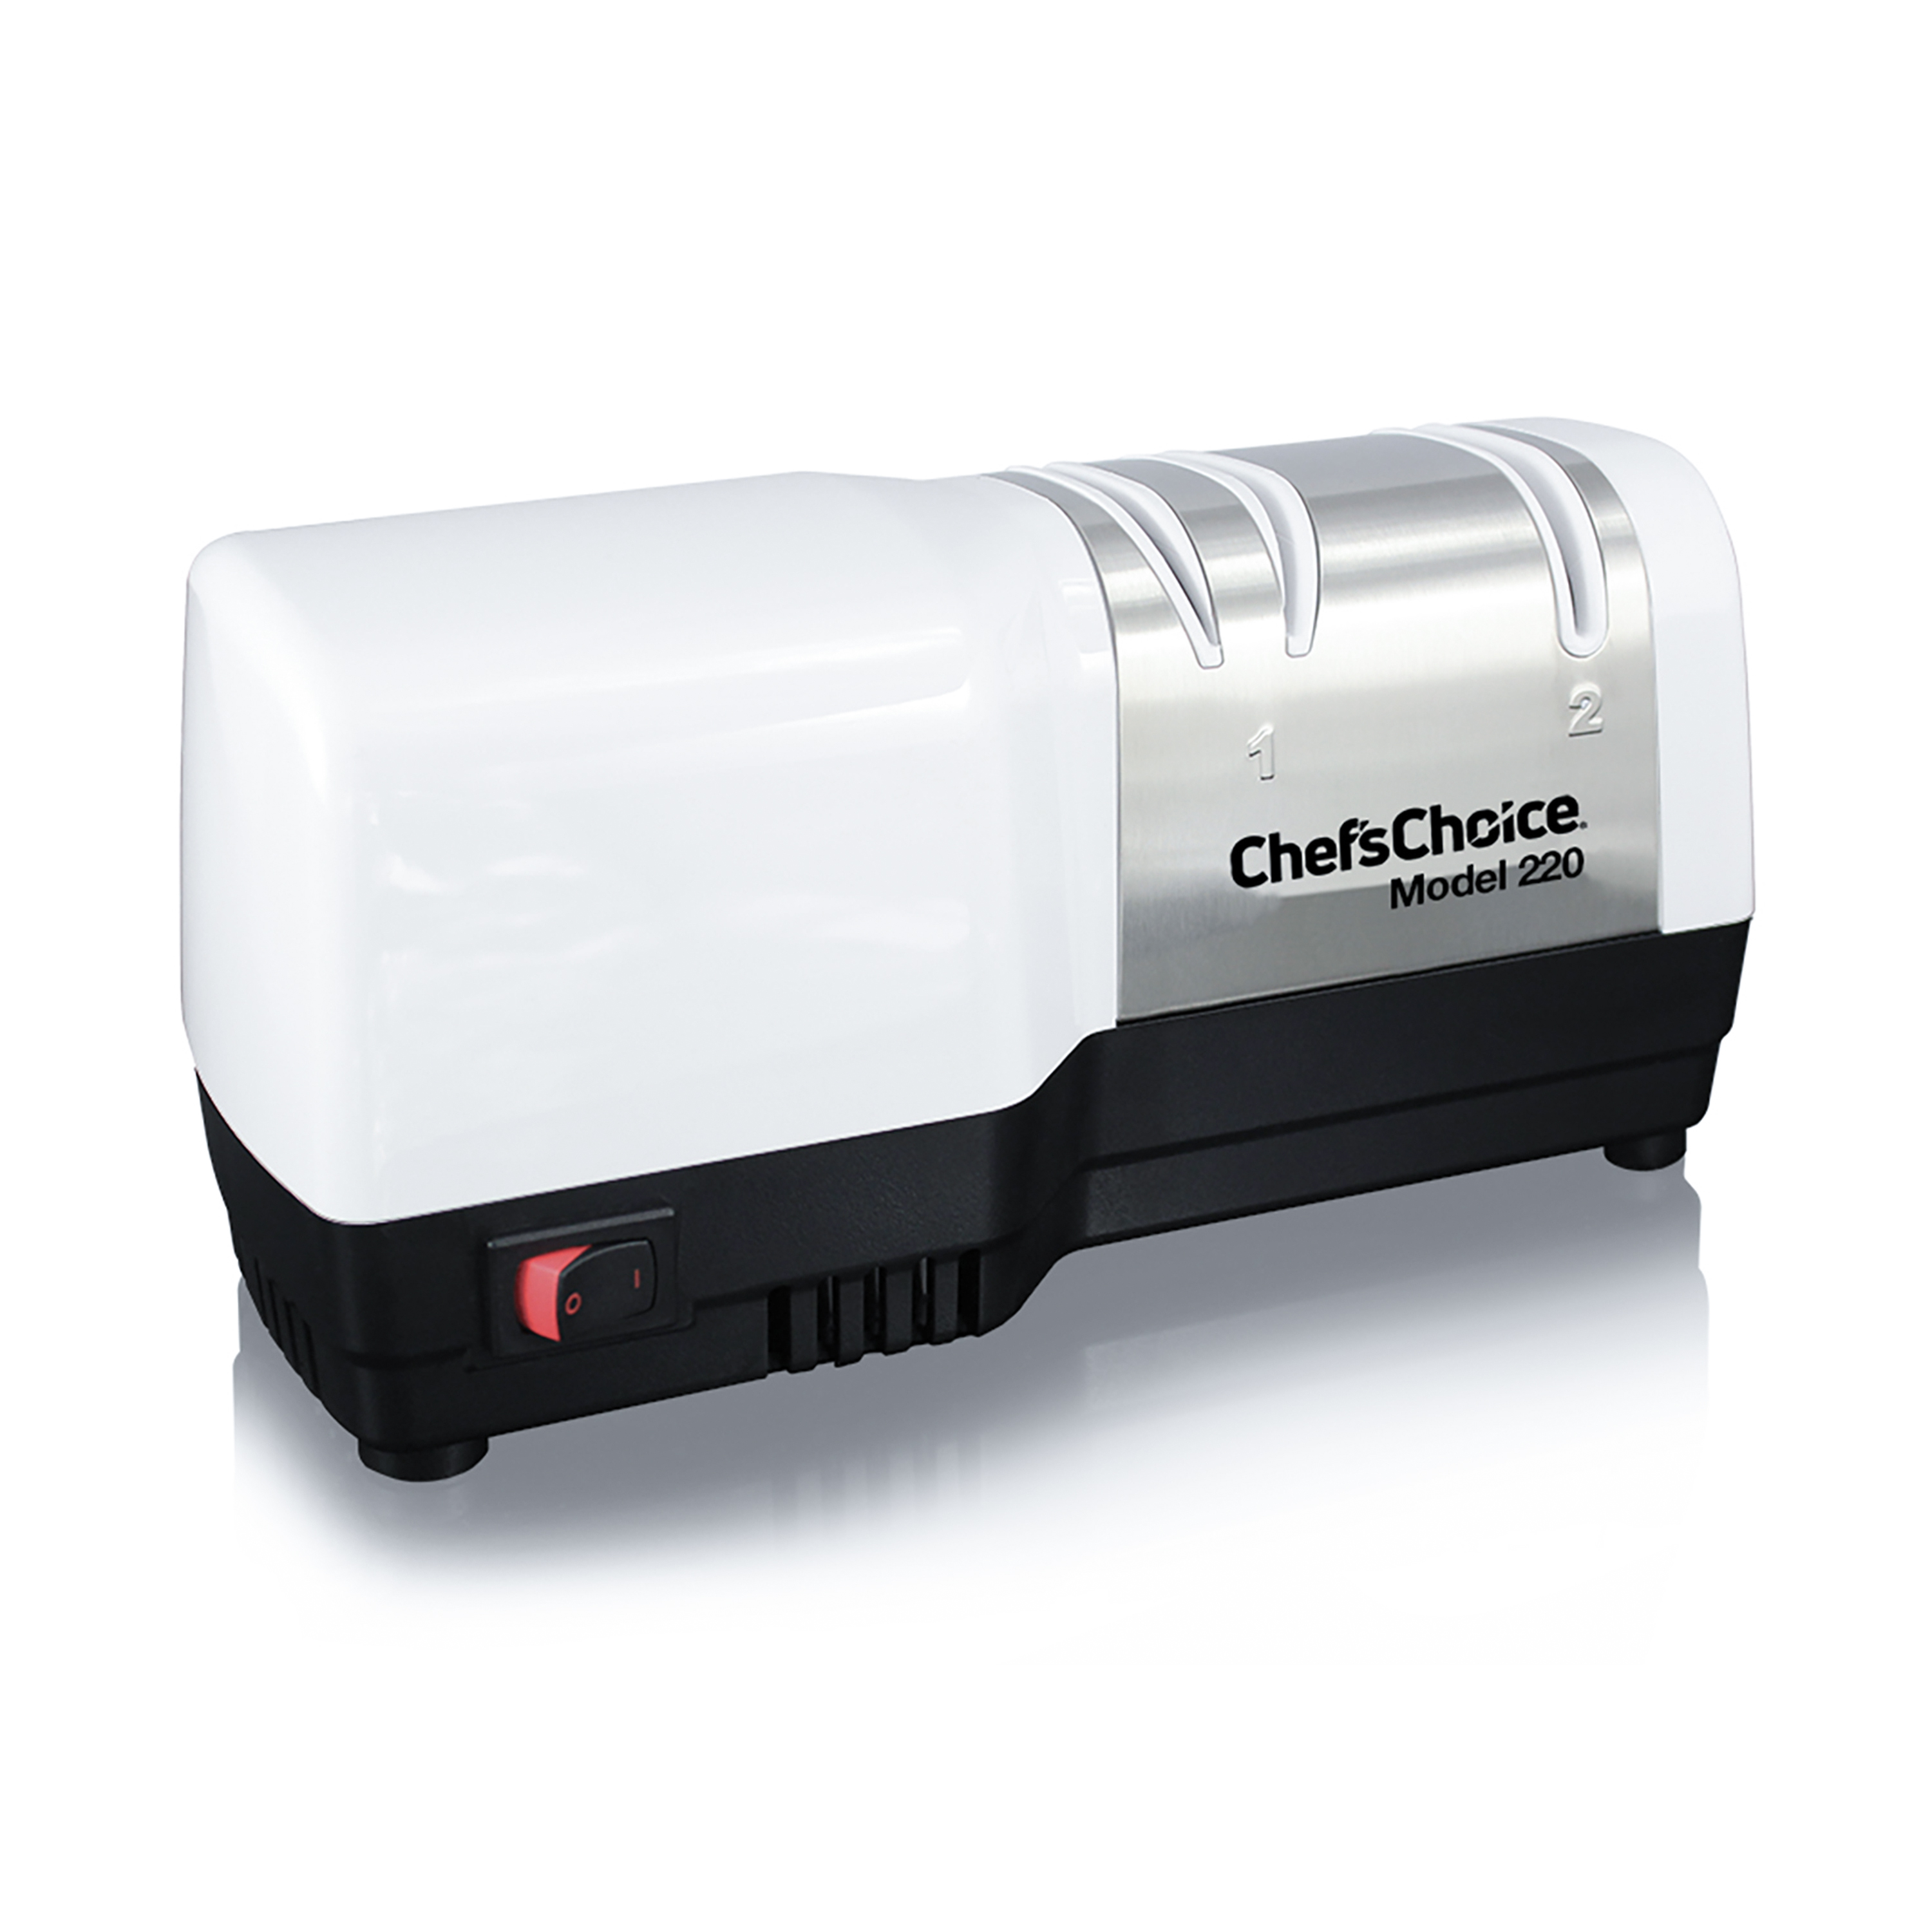 Chef'sChoice 220 Hybrid Diamond Hone 2-Stage Knife Sharpener uses Diamond Abrasives and Combines Electric and Manual Sharpening Sharpens Straight and Serrated Knives - image 1 of 2